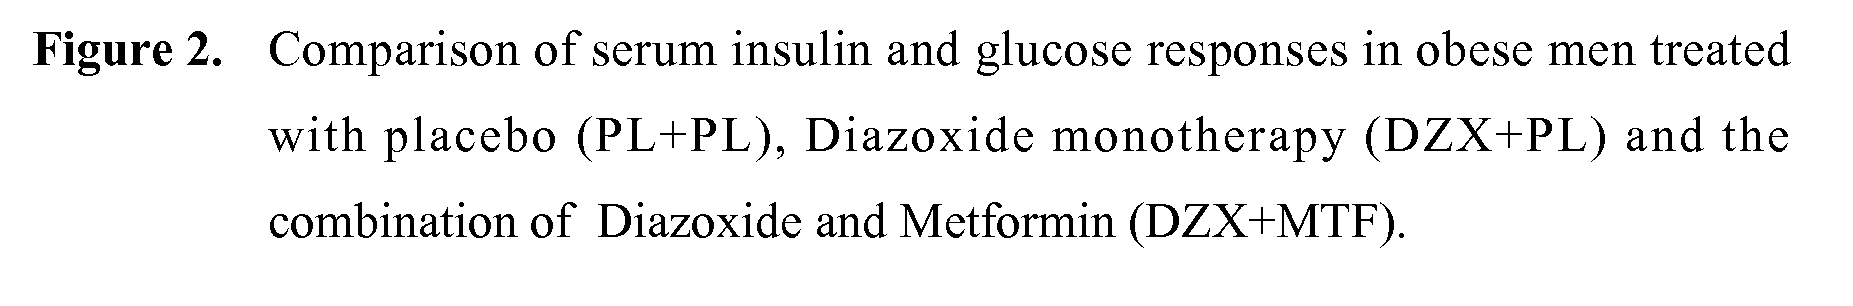 Use of a combination of diazoxide and metformin for treating obesity or obesity related disorders